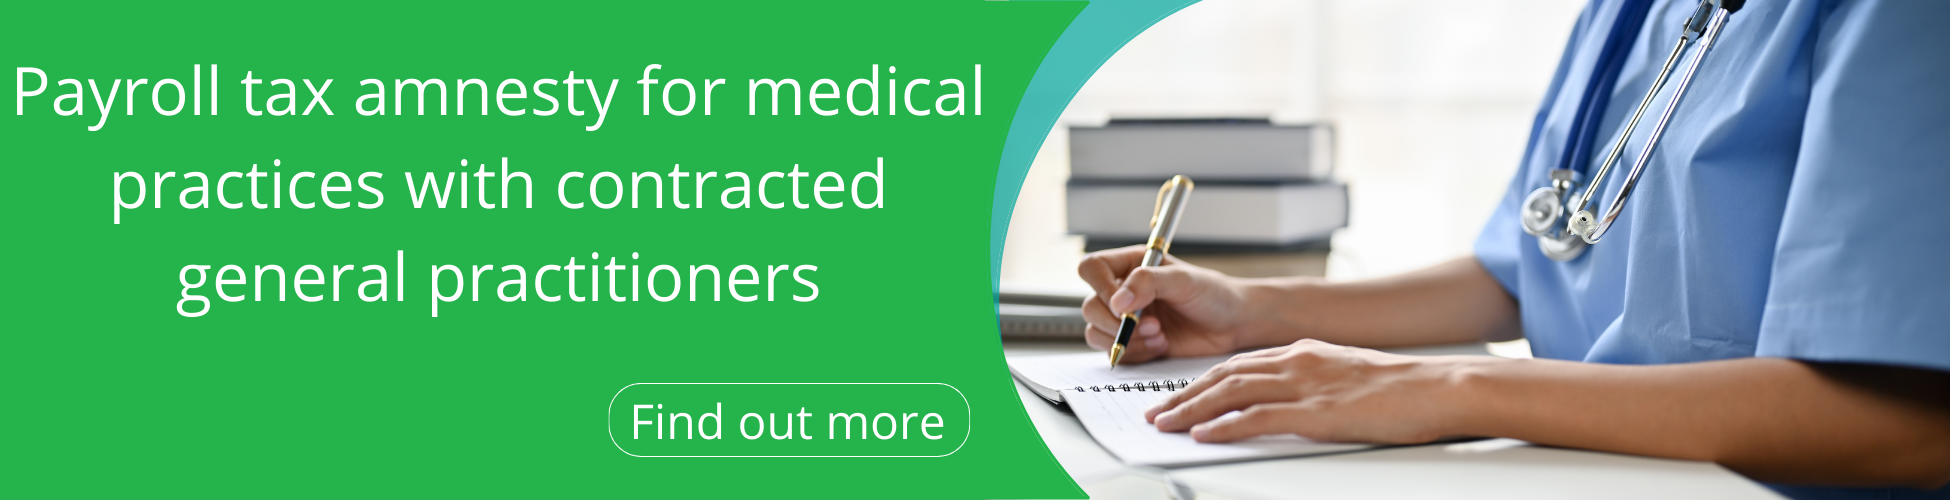 Payroll tax amnesty for medical practices with contracted general practitioners link to find out more